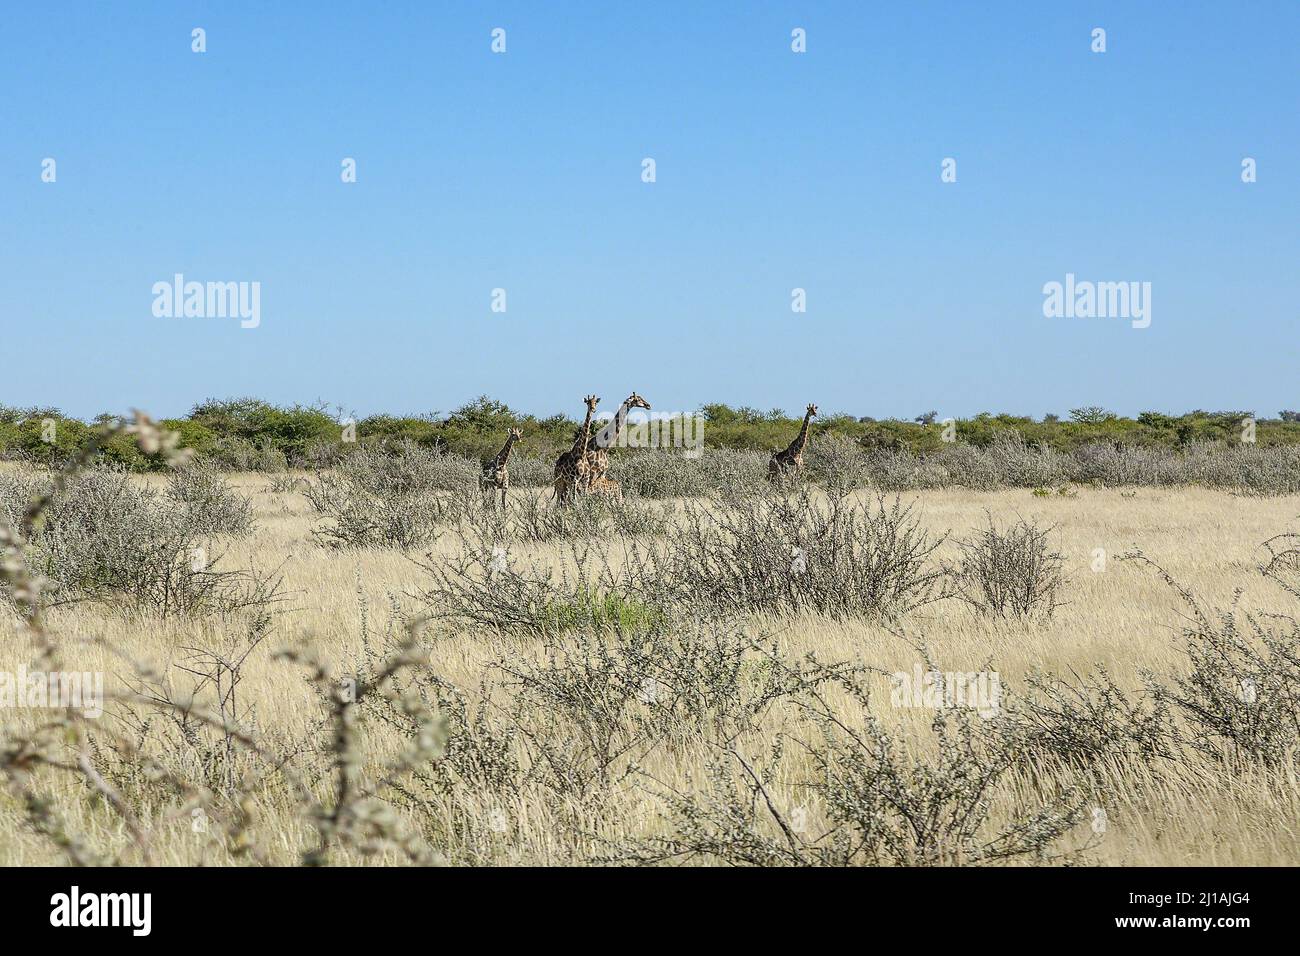 A smal group of Giraffes (5) including one baby Giraffe surrounded by long grass, bushes and trees in Etosha National Park, Namibia, South West Africa Stock Photo